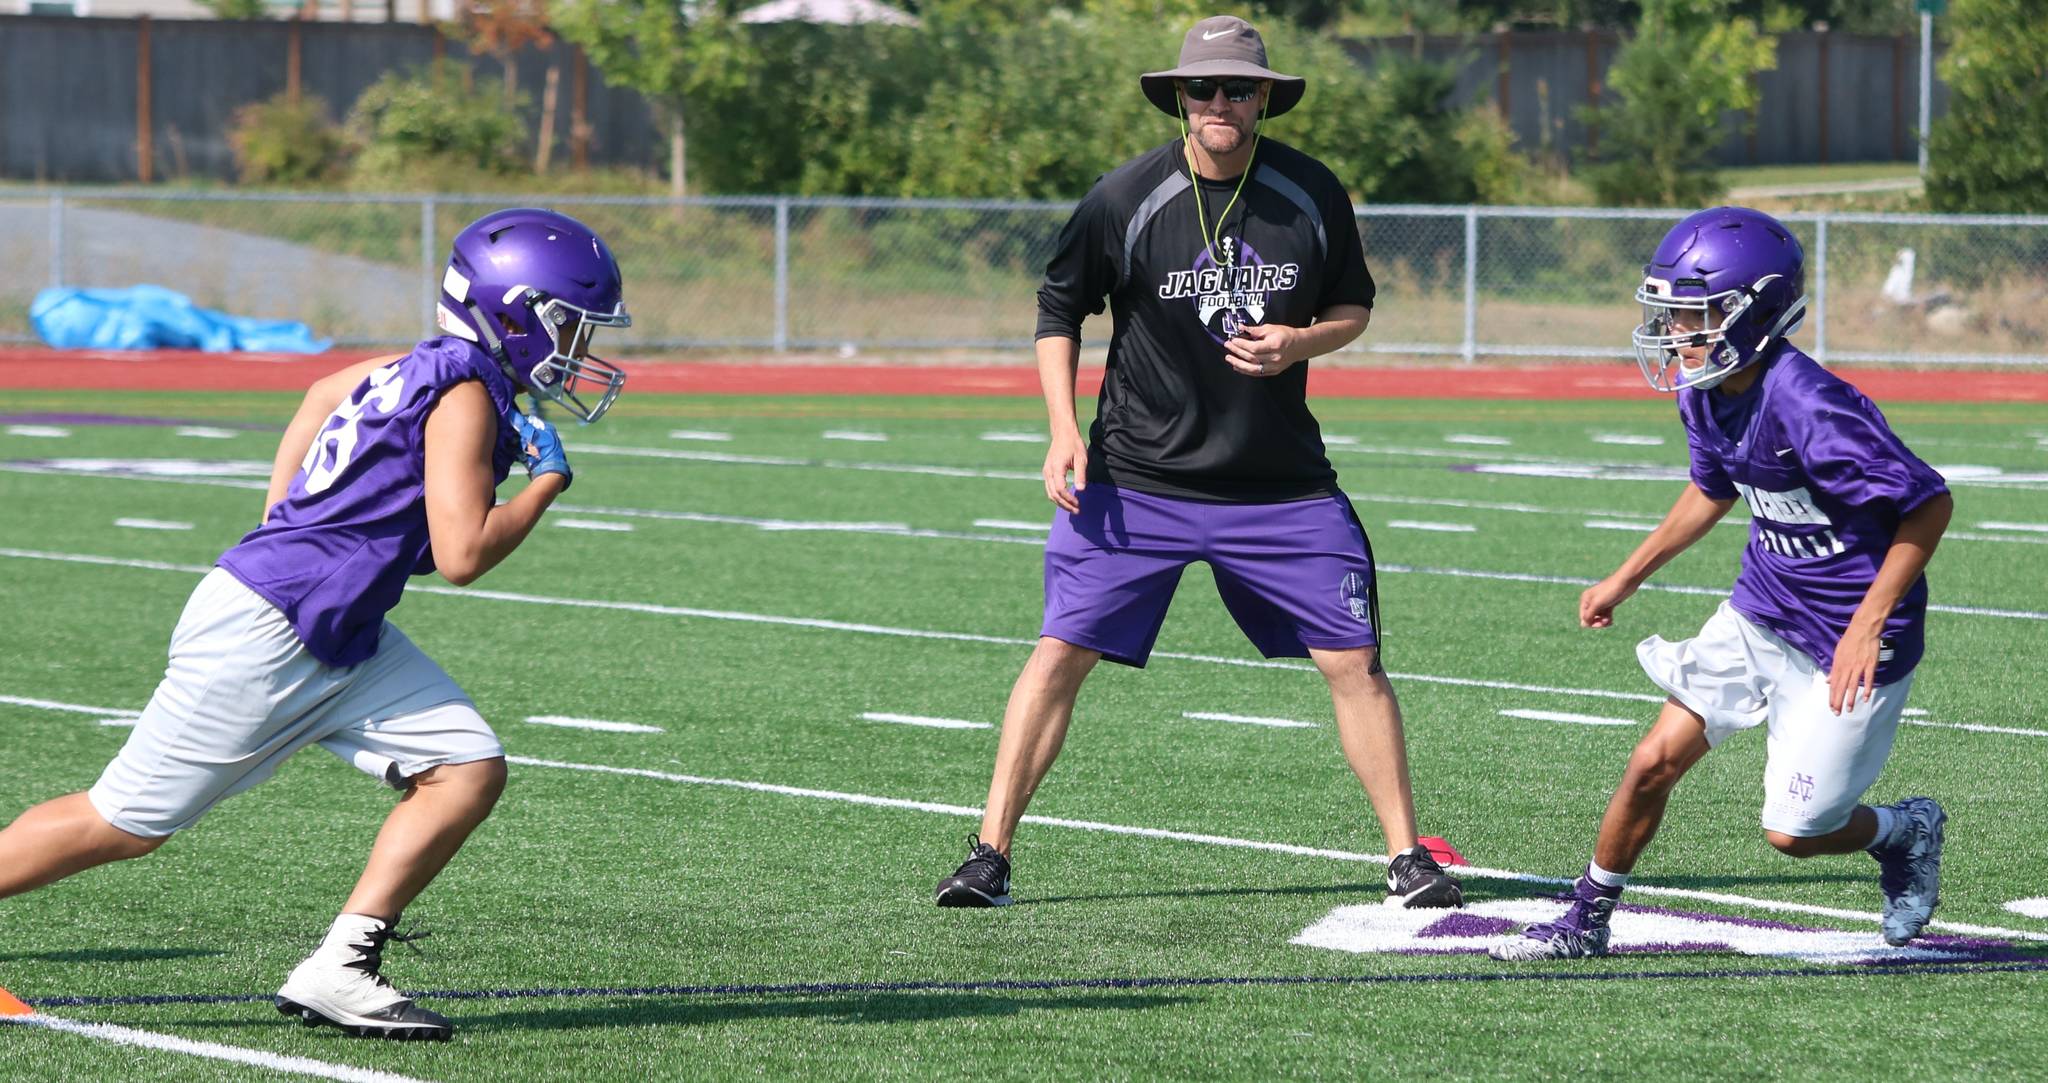 North Creek head coach Torrey Myers eyes two of his players at practice on Aug. 17. Andy Nystrom / staff photo